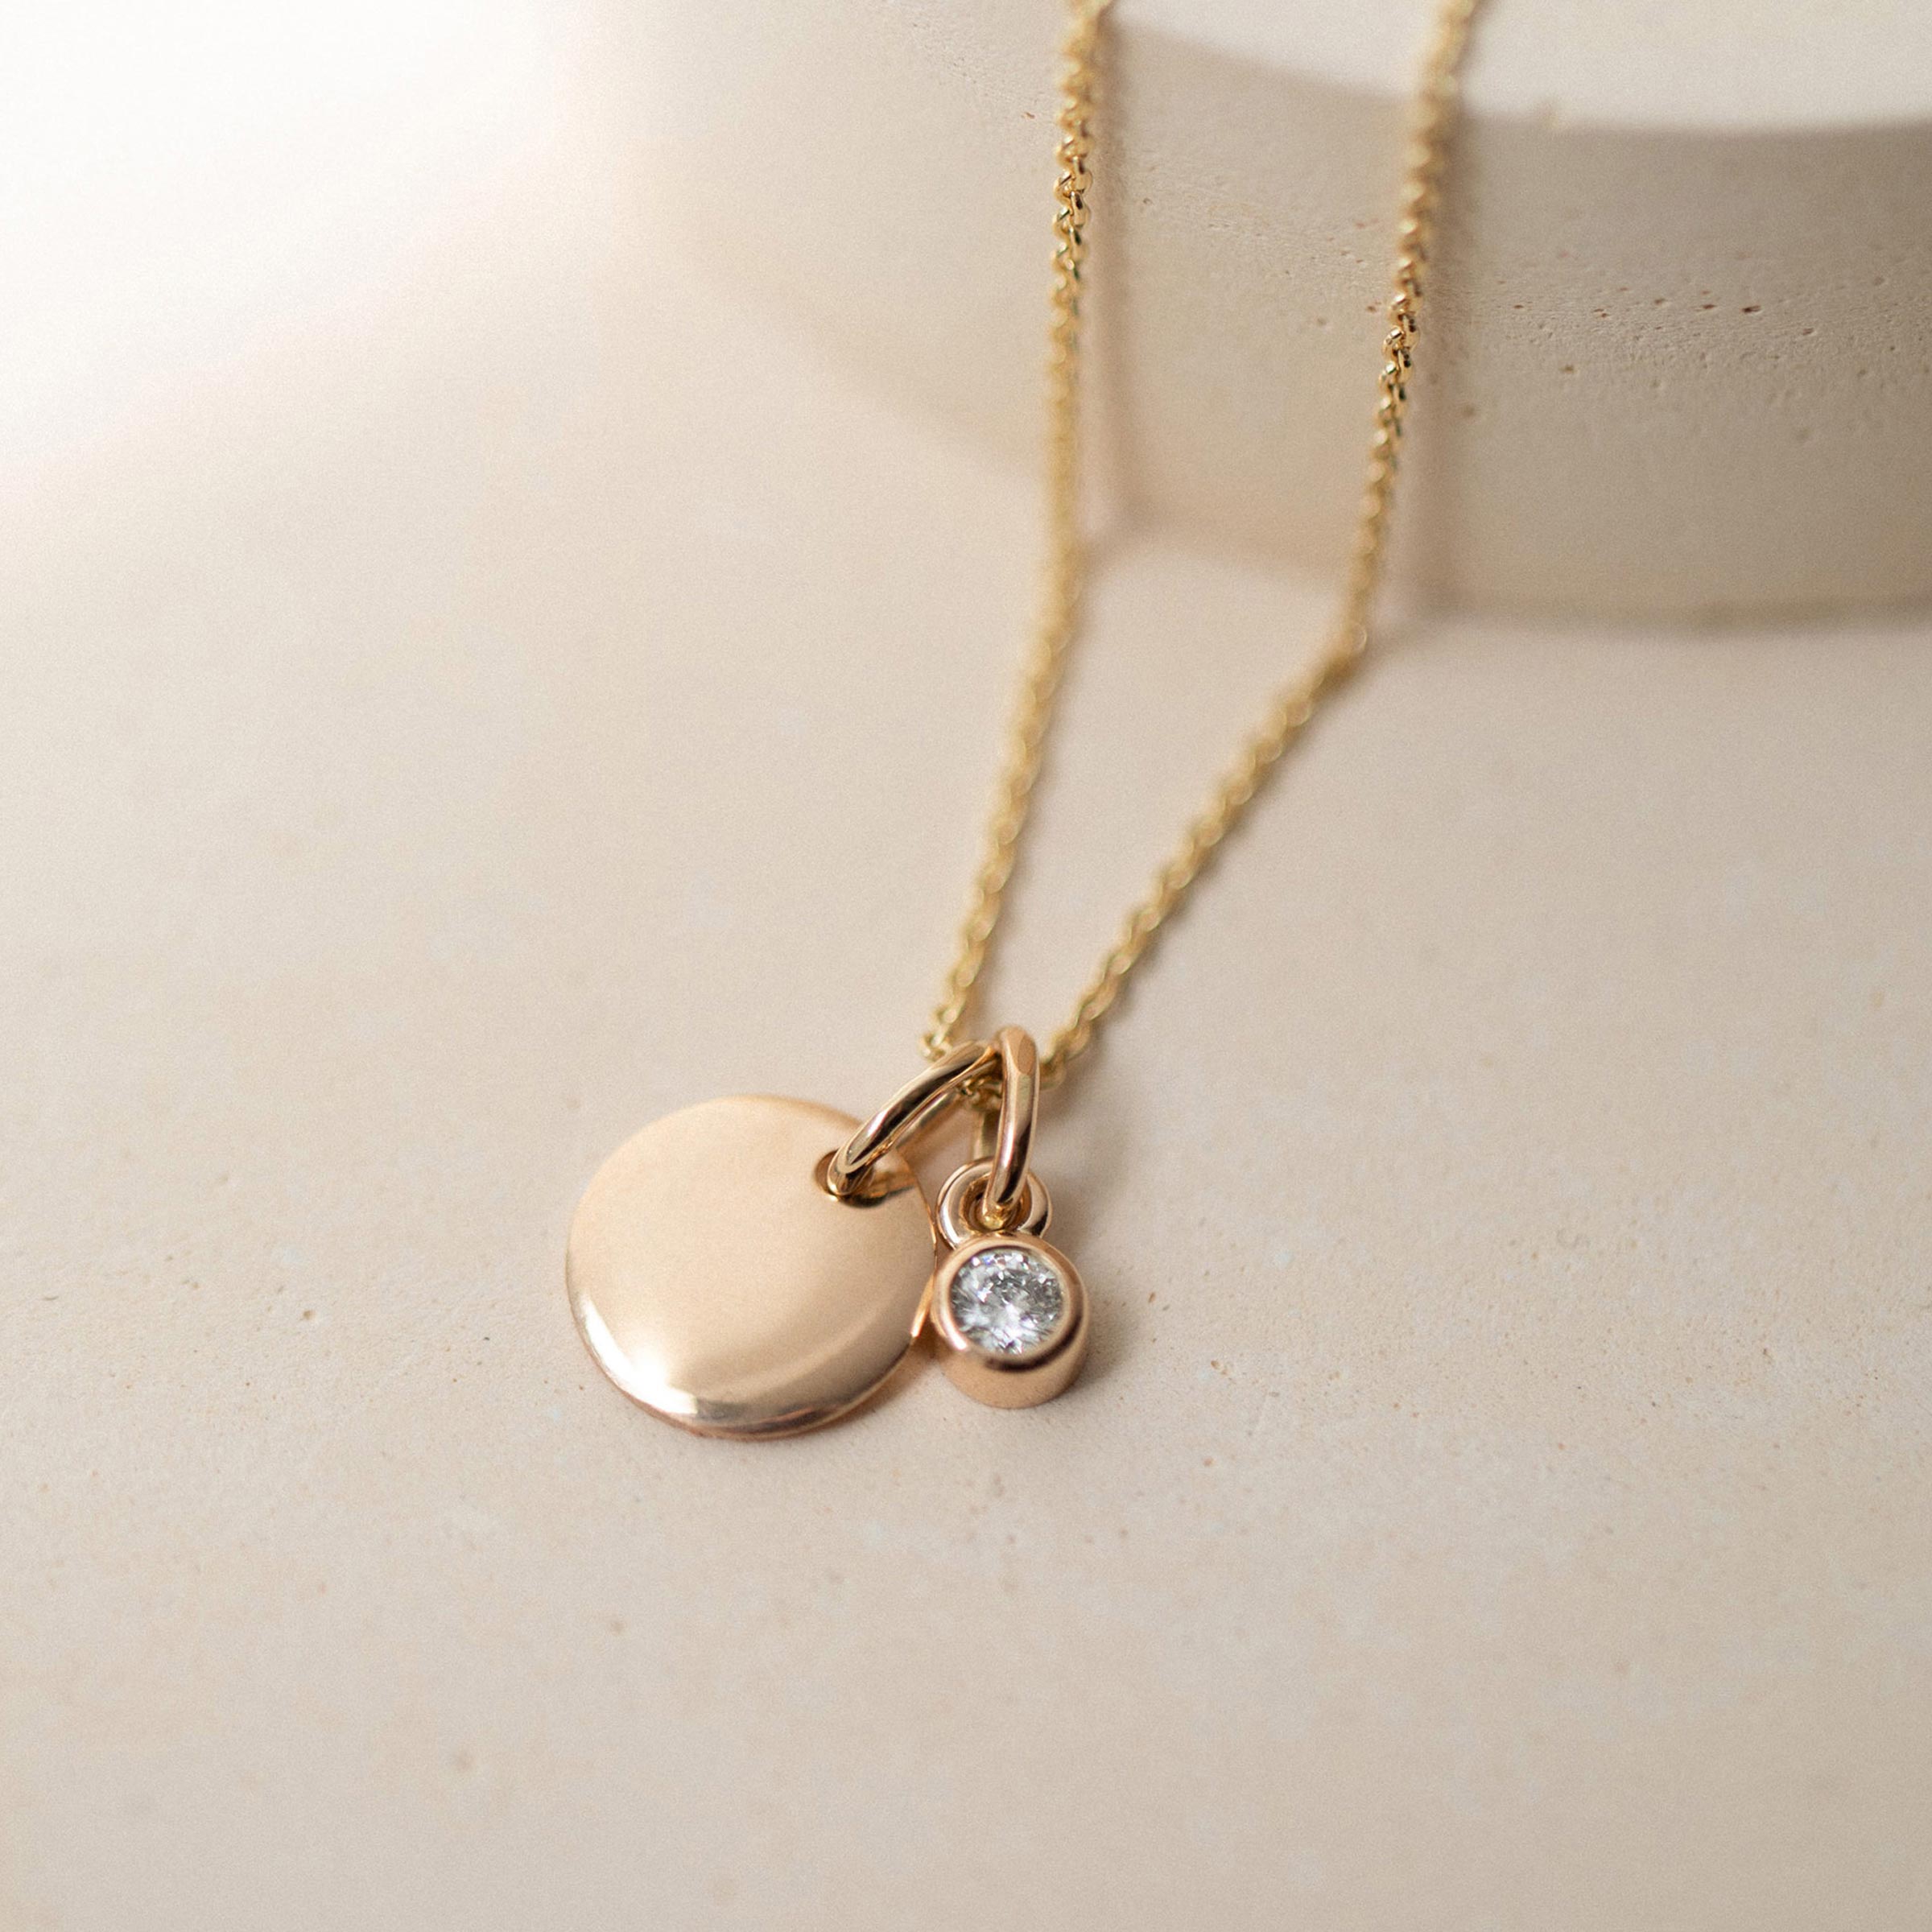 Smooth disk and diamond necklace